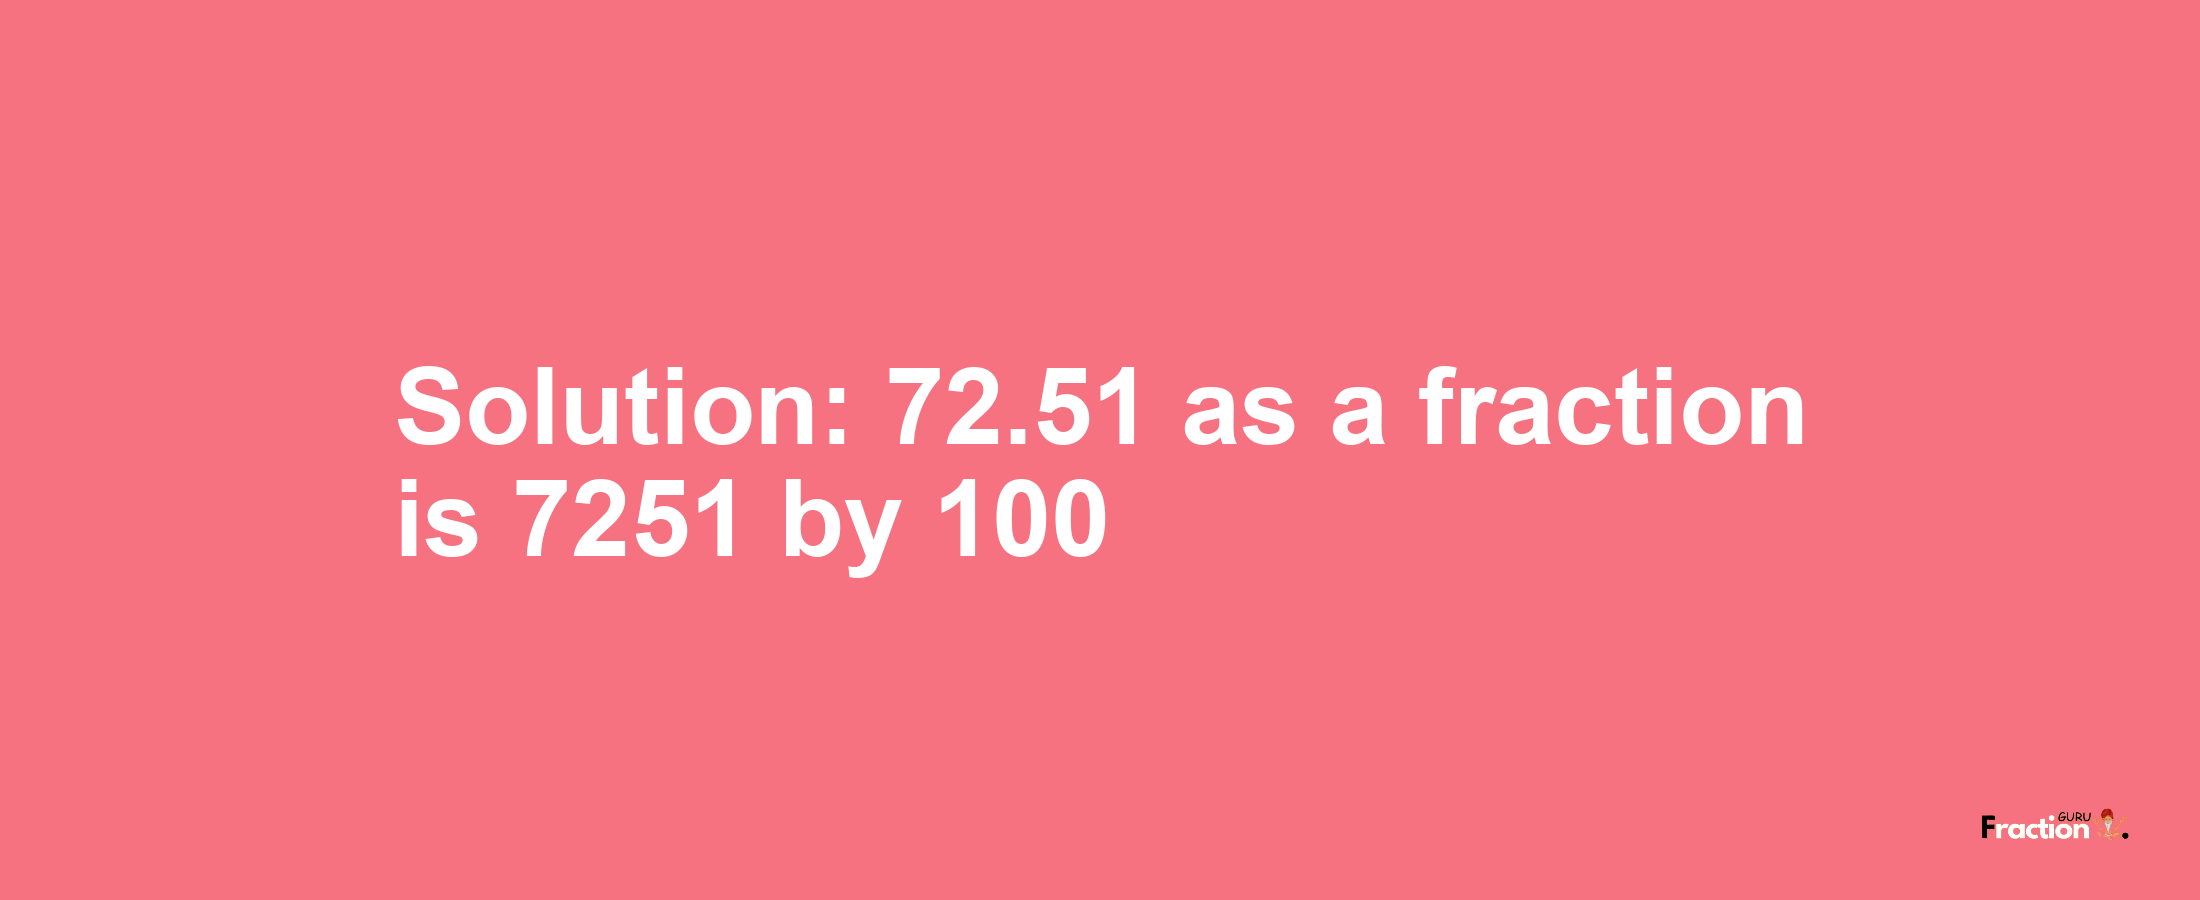 Solution:72.51 as a fraction is 7251/100